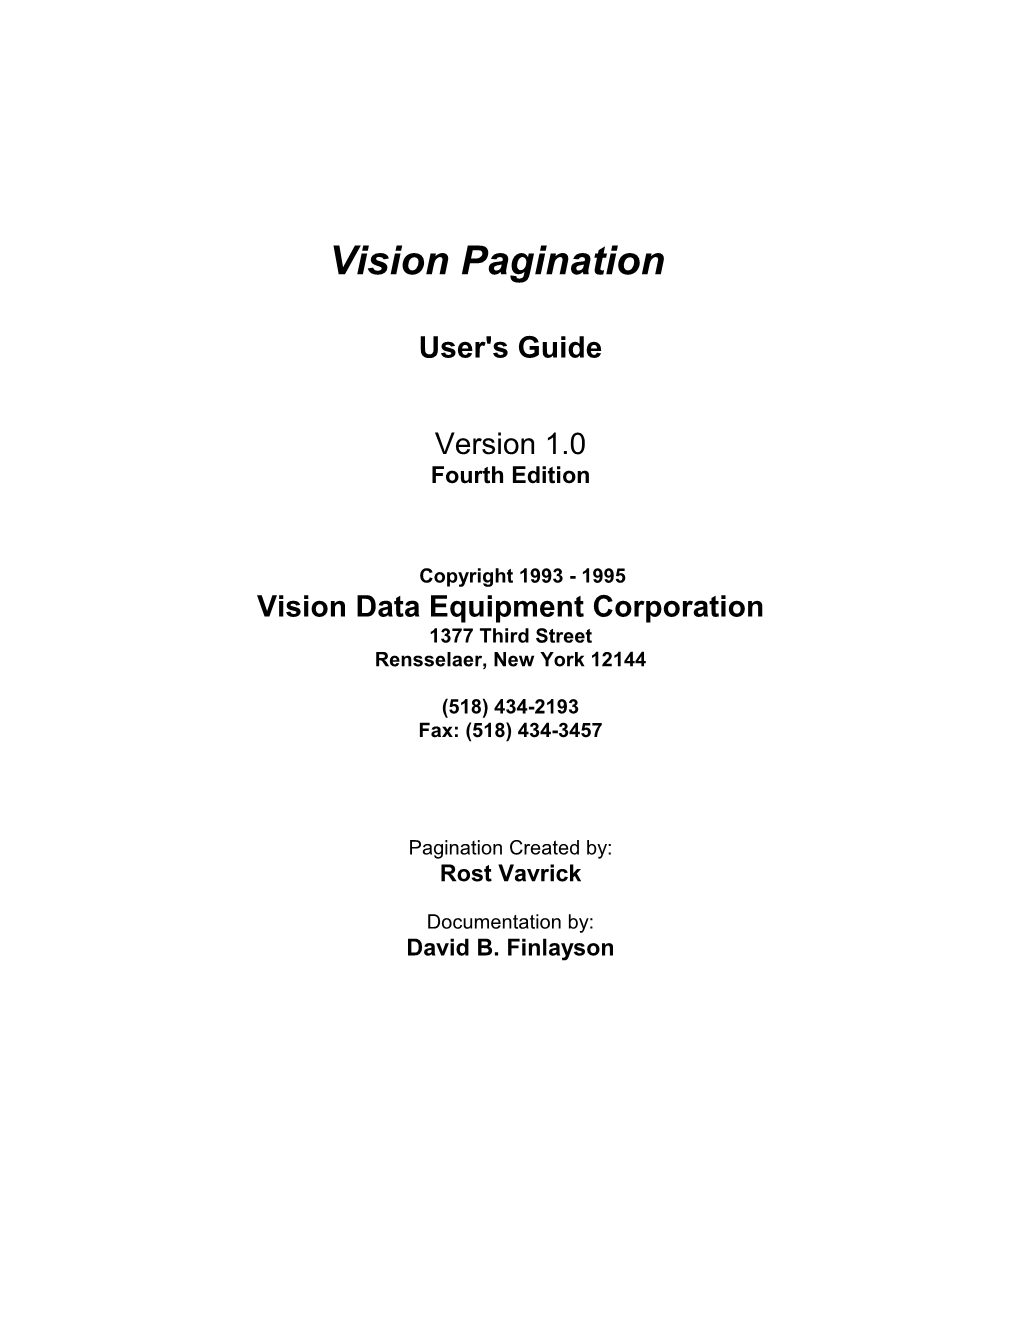 Classified Pagination Users Guide